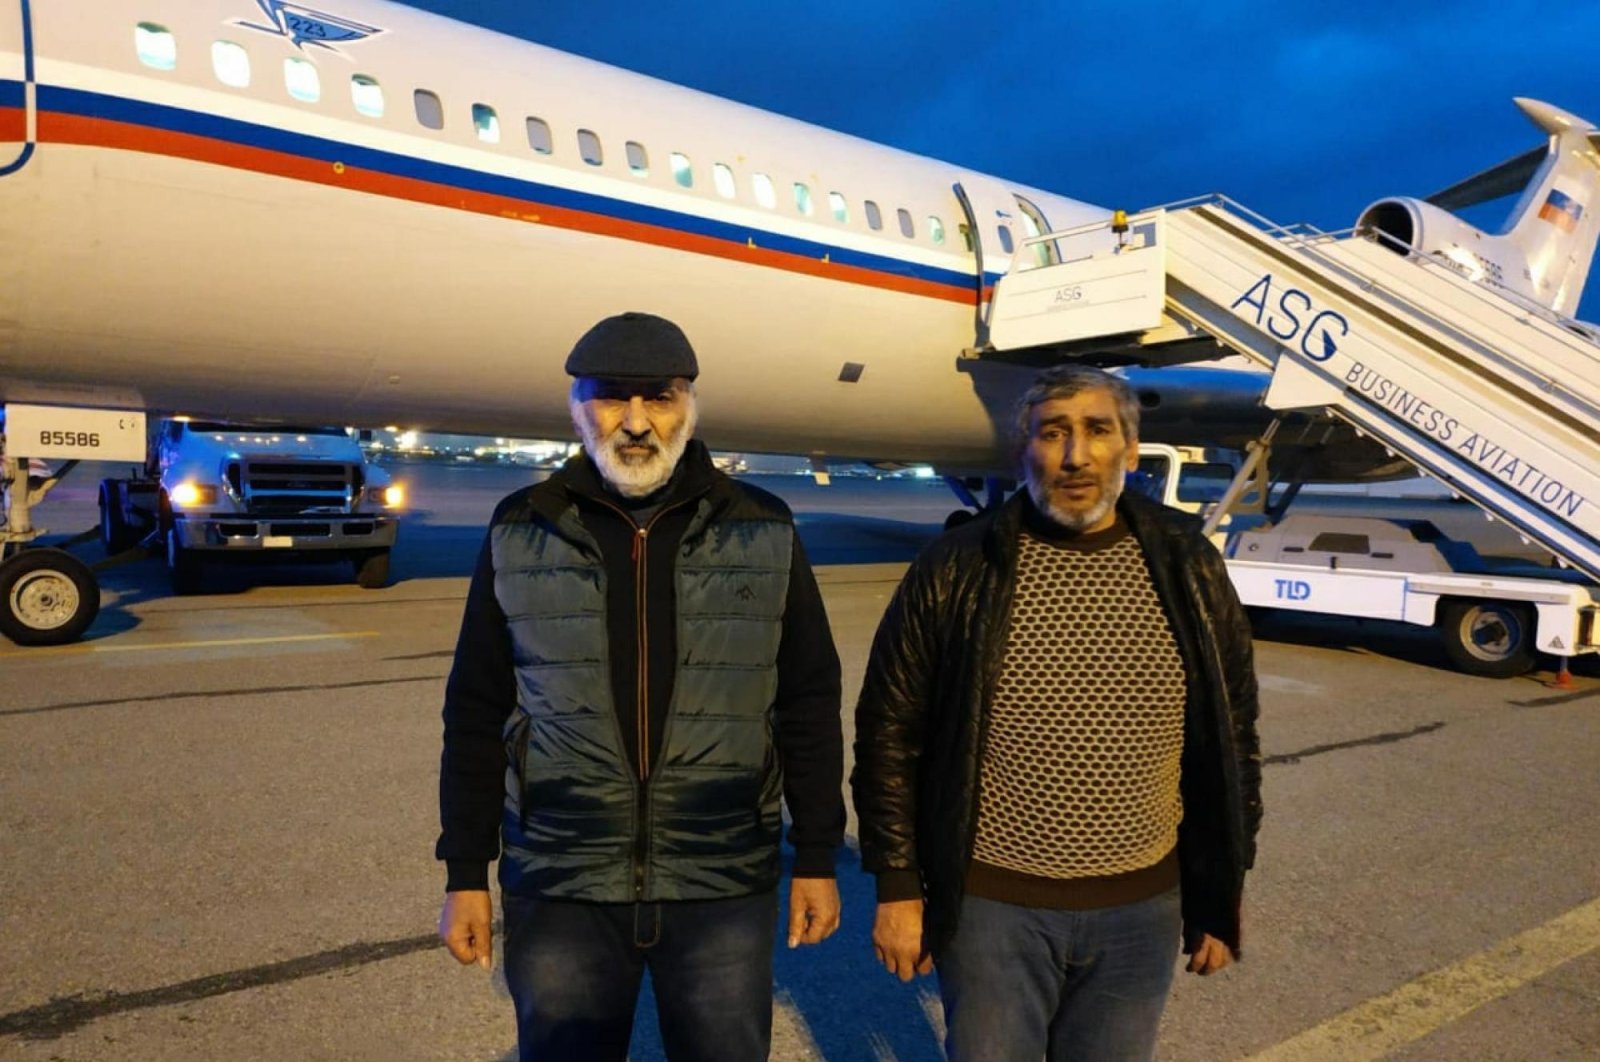 Dilgam Asgarov (L) and Shahbaz Guliyev, who had been held captive by Armenia for six years, stand in front of a plane after being released and brought to Baku, Azerbaijan, Dec.14, 2020. (AA)